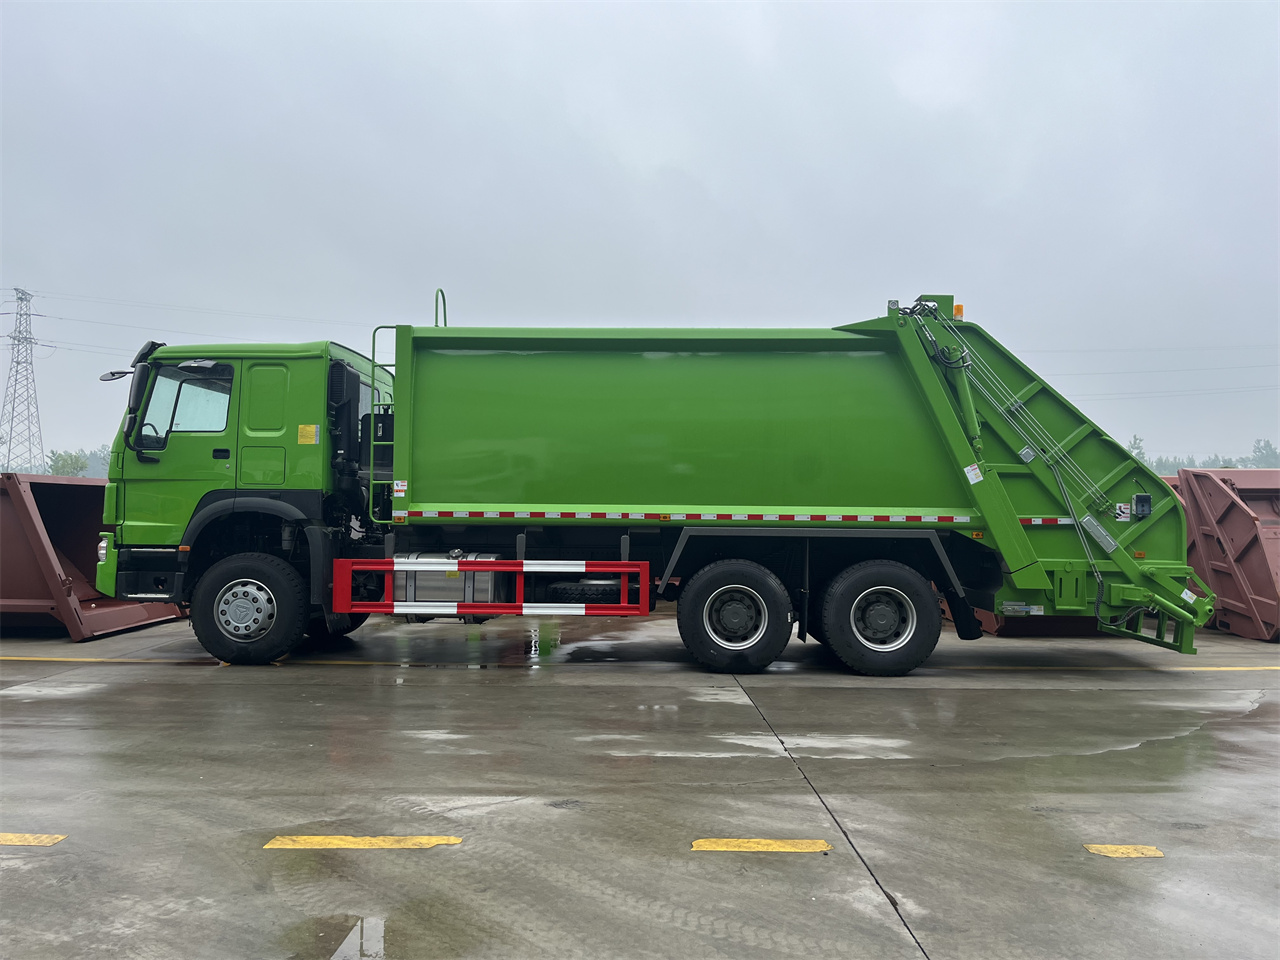 What are the main functions of the compressed garbage truck?